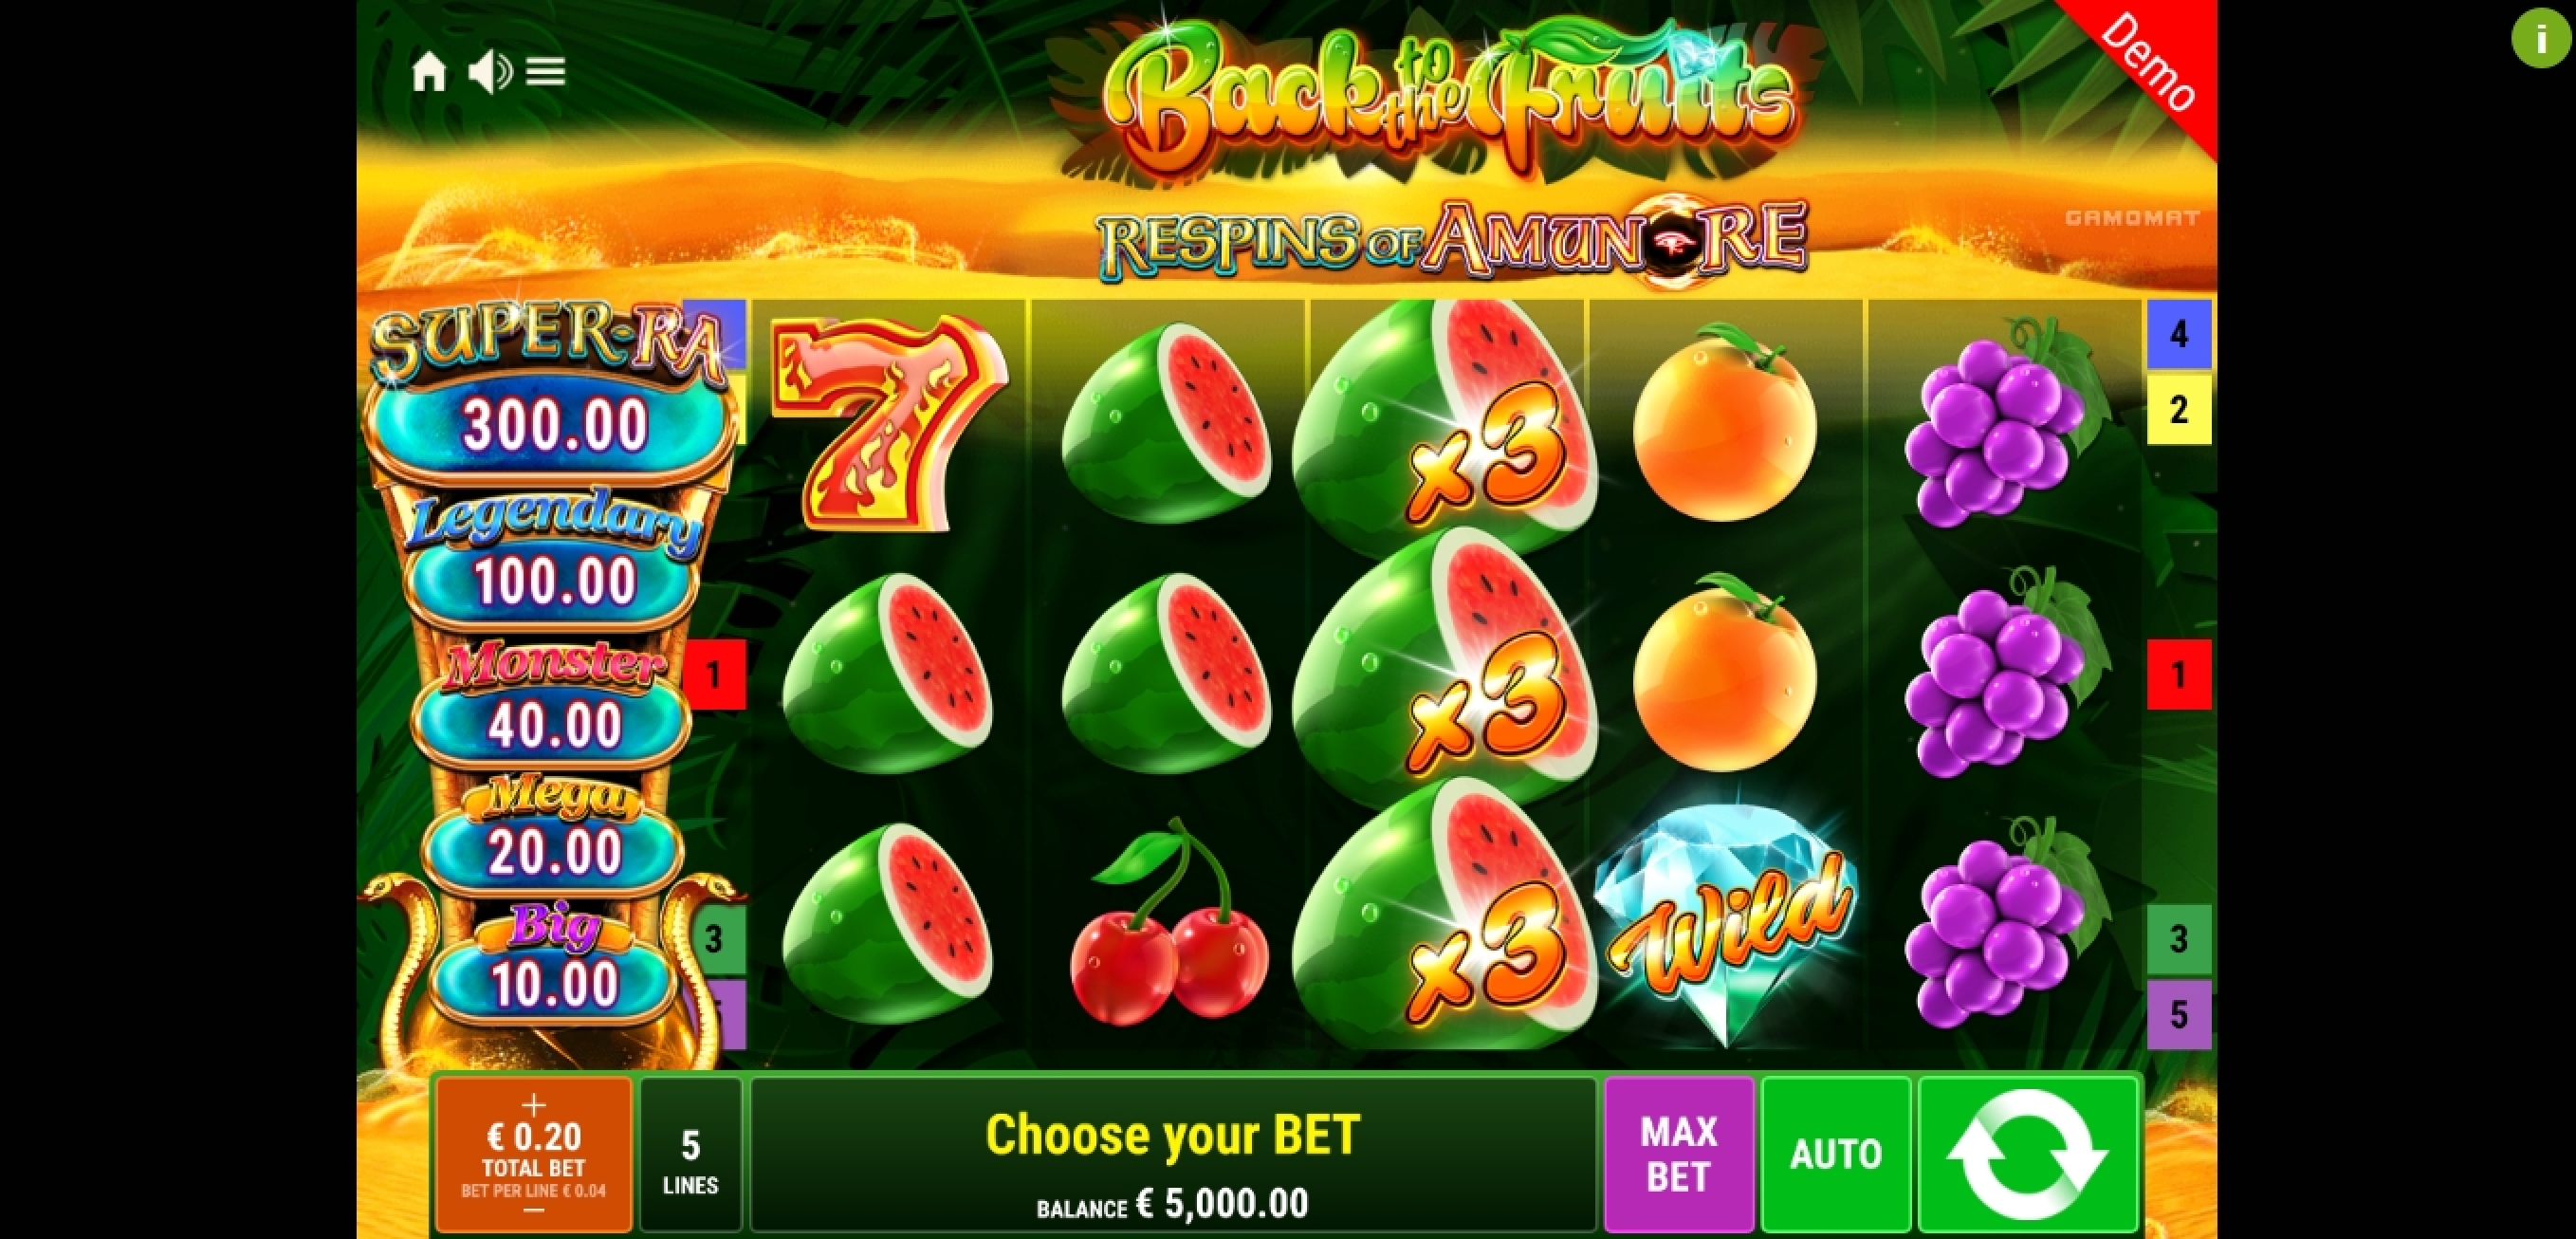 Reels in Back to the Fruits Respins of Amun-Re Slot Game by Gamomat